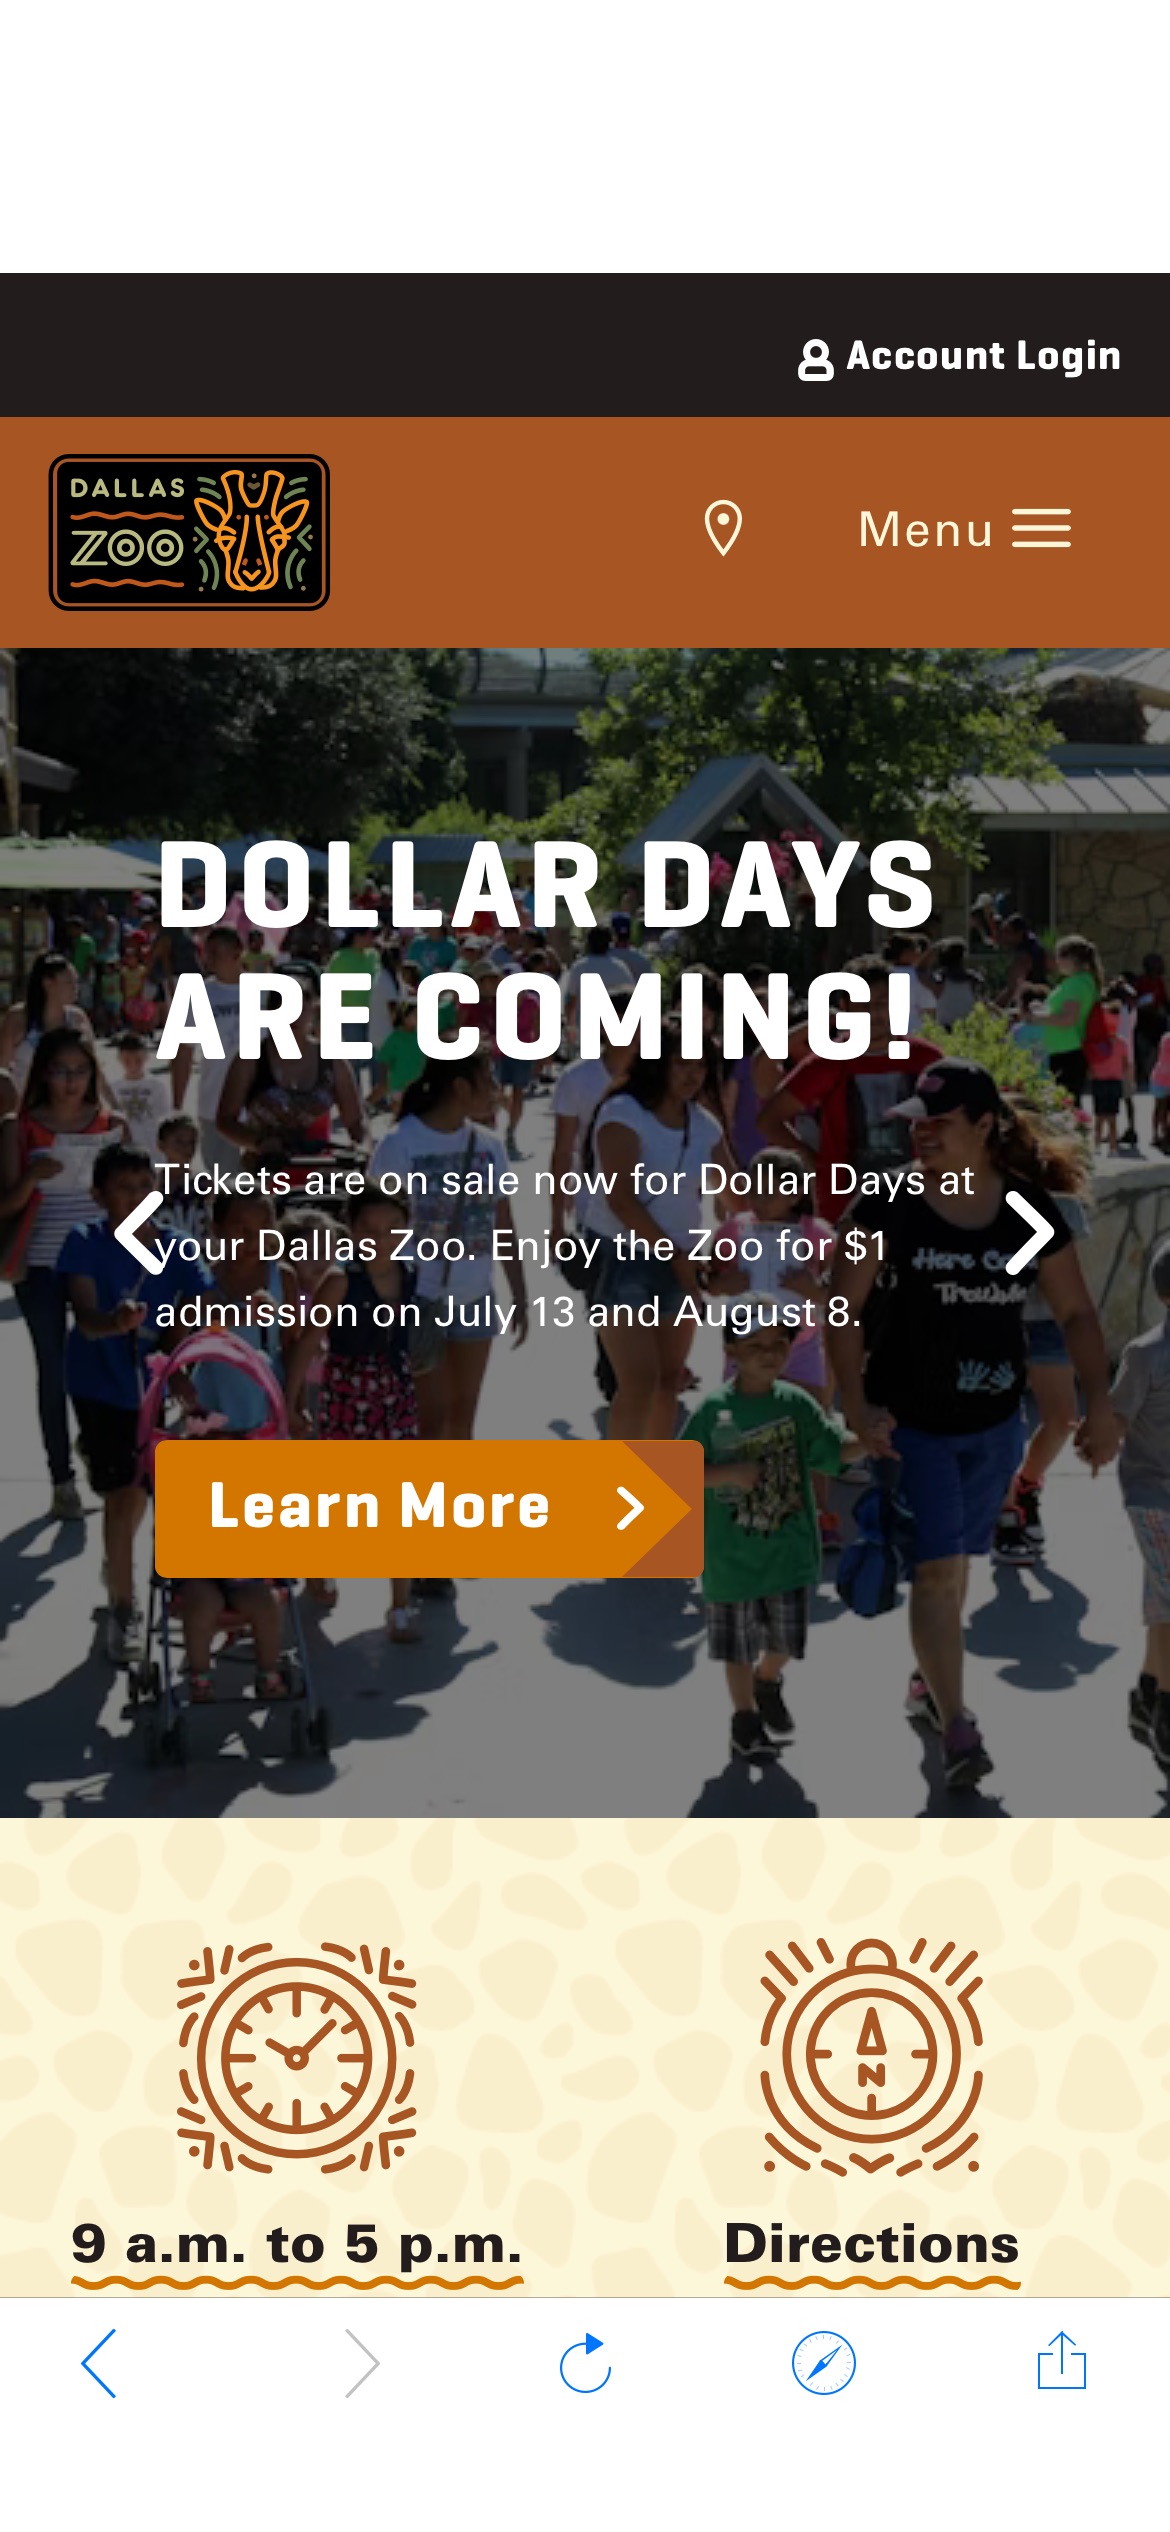 Dallas Zoo | Welcome to the Largest Zoological Experience in Texas!